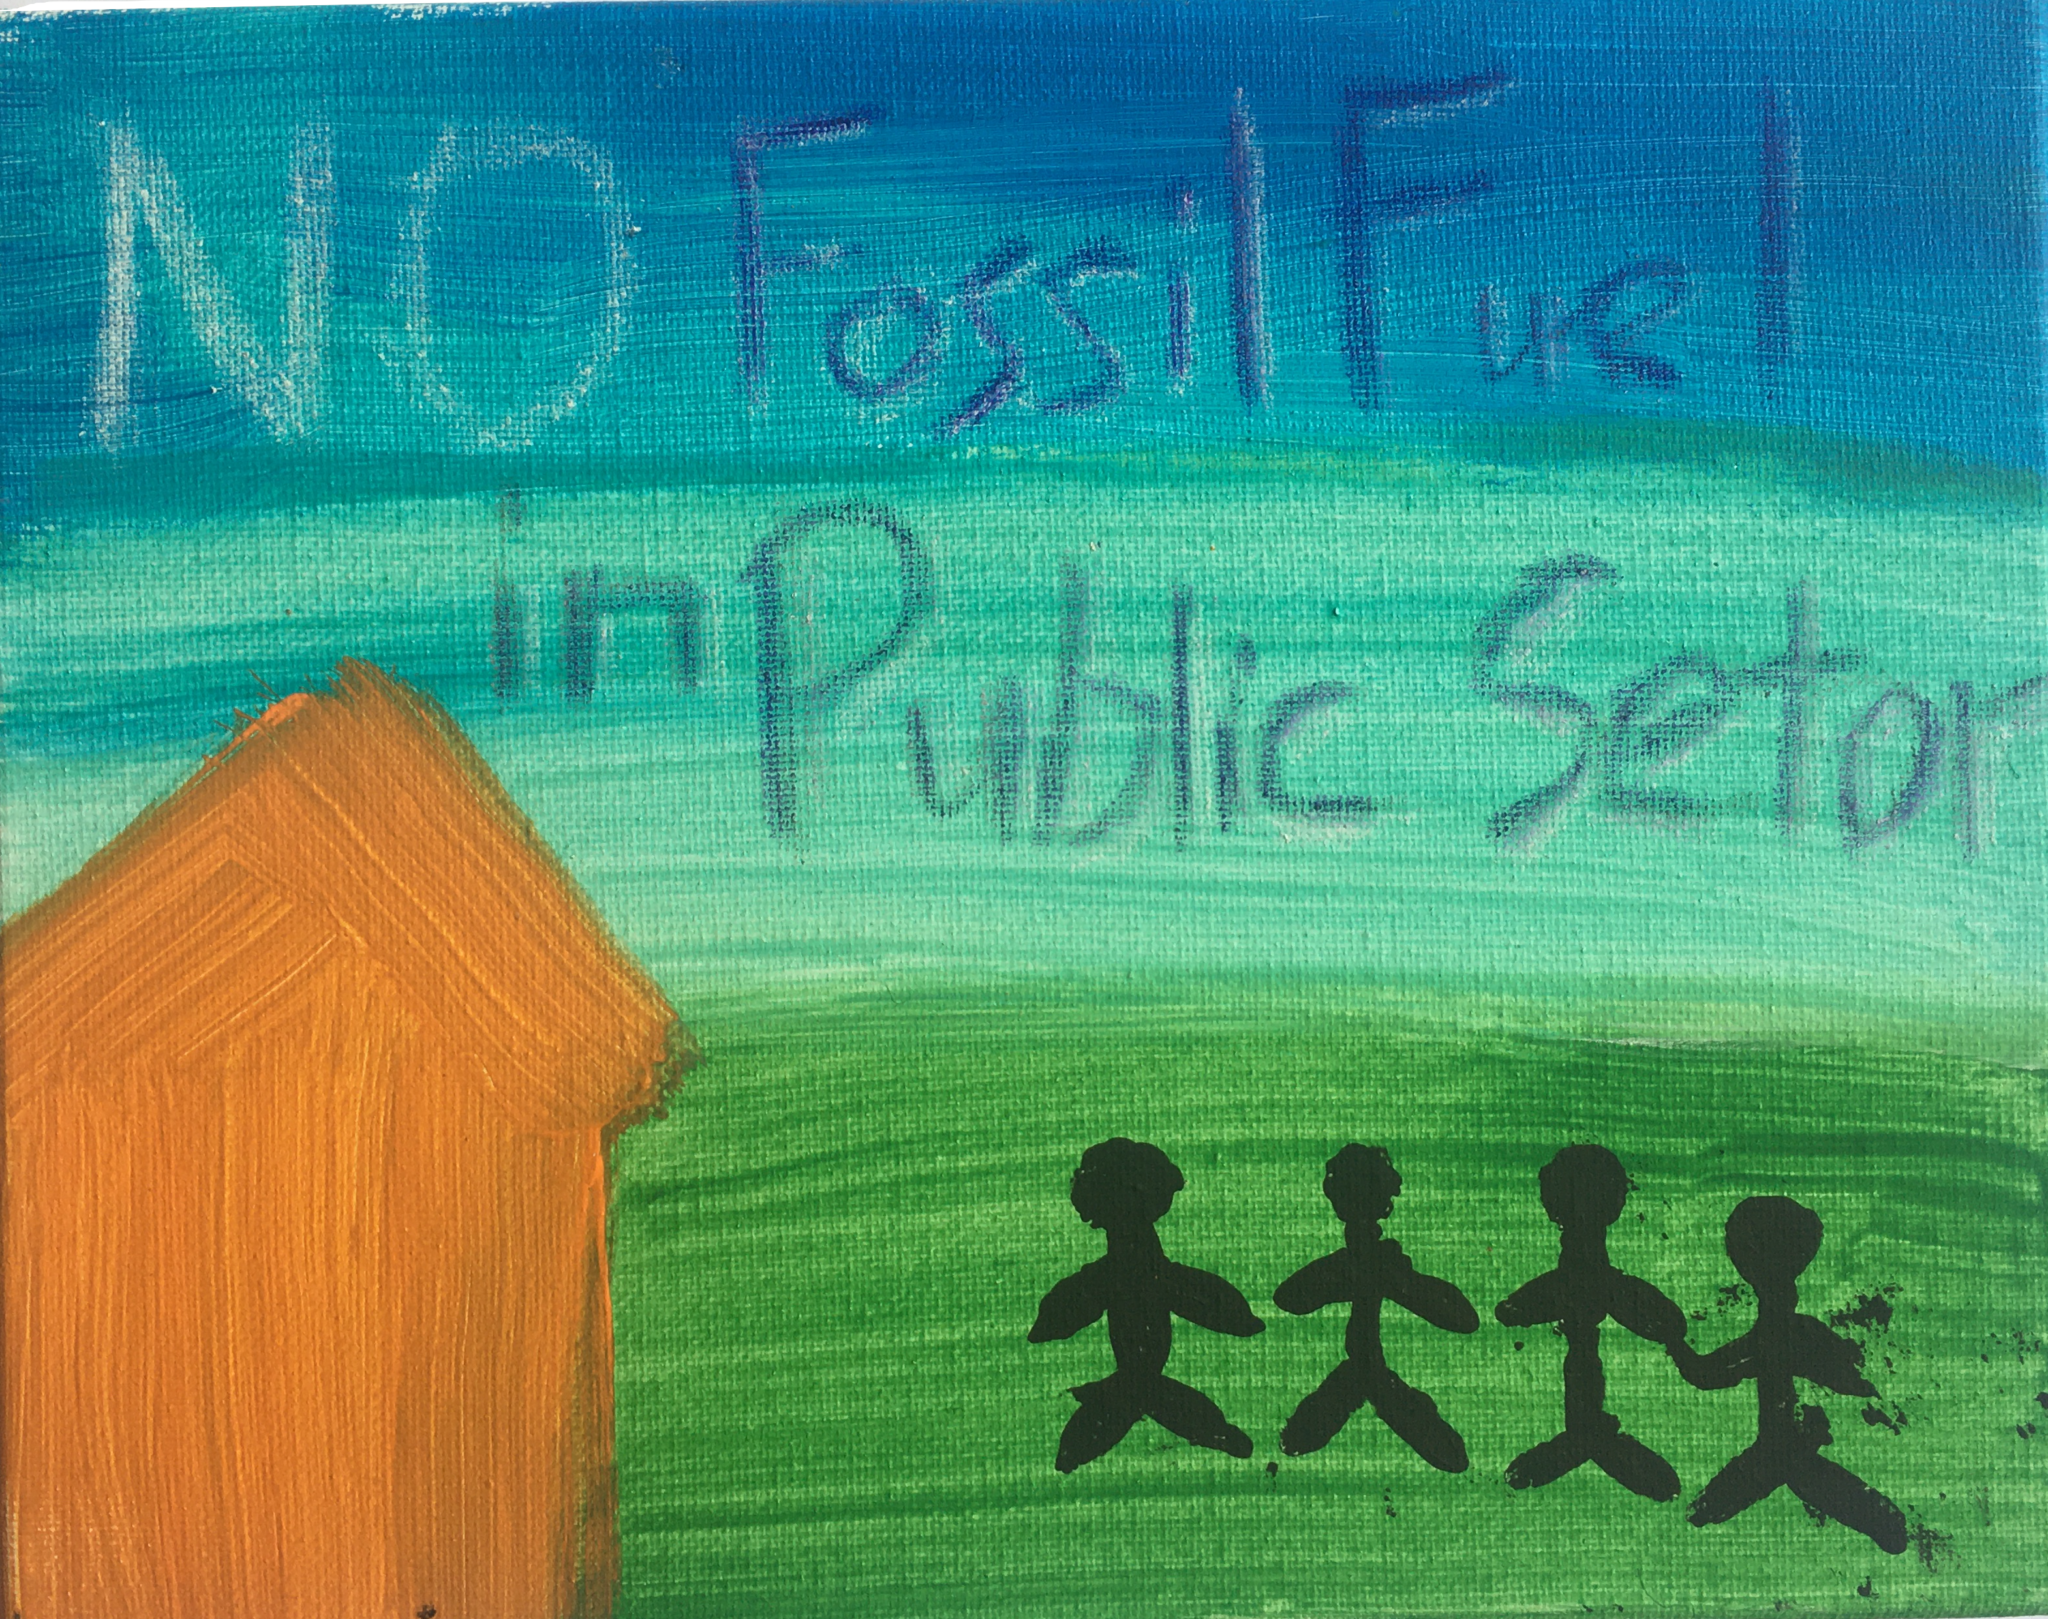 A dark blue sky fades to light blue, green grass and an orange silhouette of a house, with the text 'NO Fossil Fuel in Public Sector' in the sky. 4 stick figure people stand on the grass